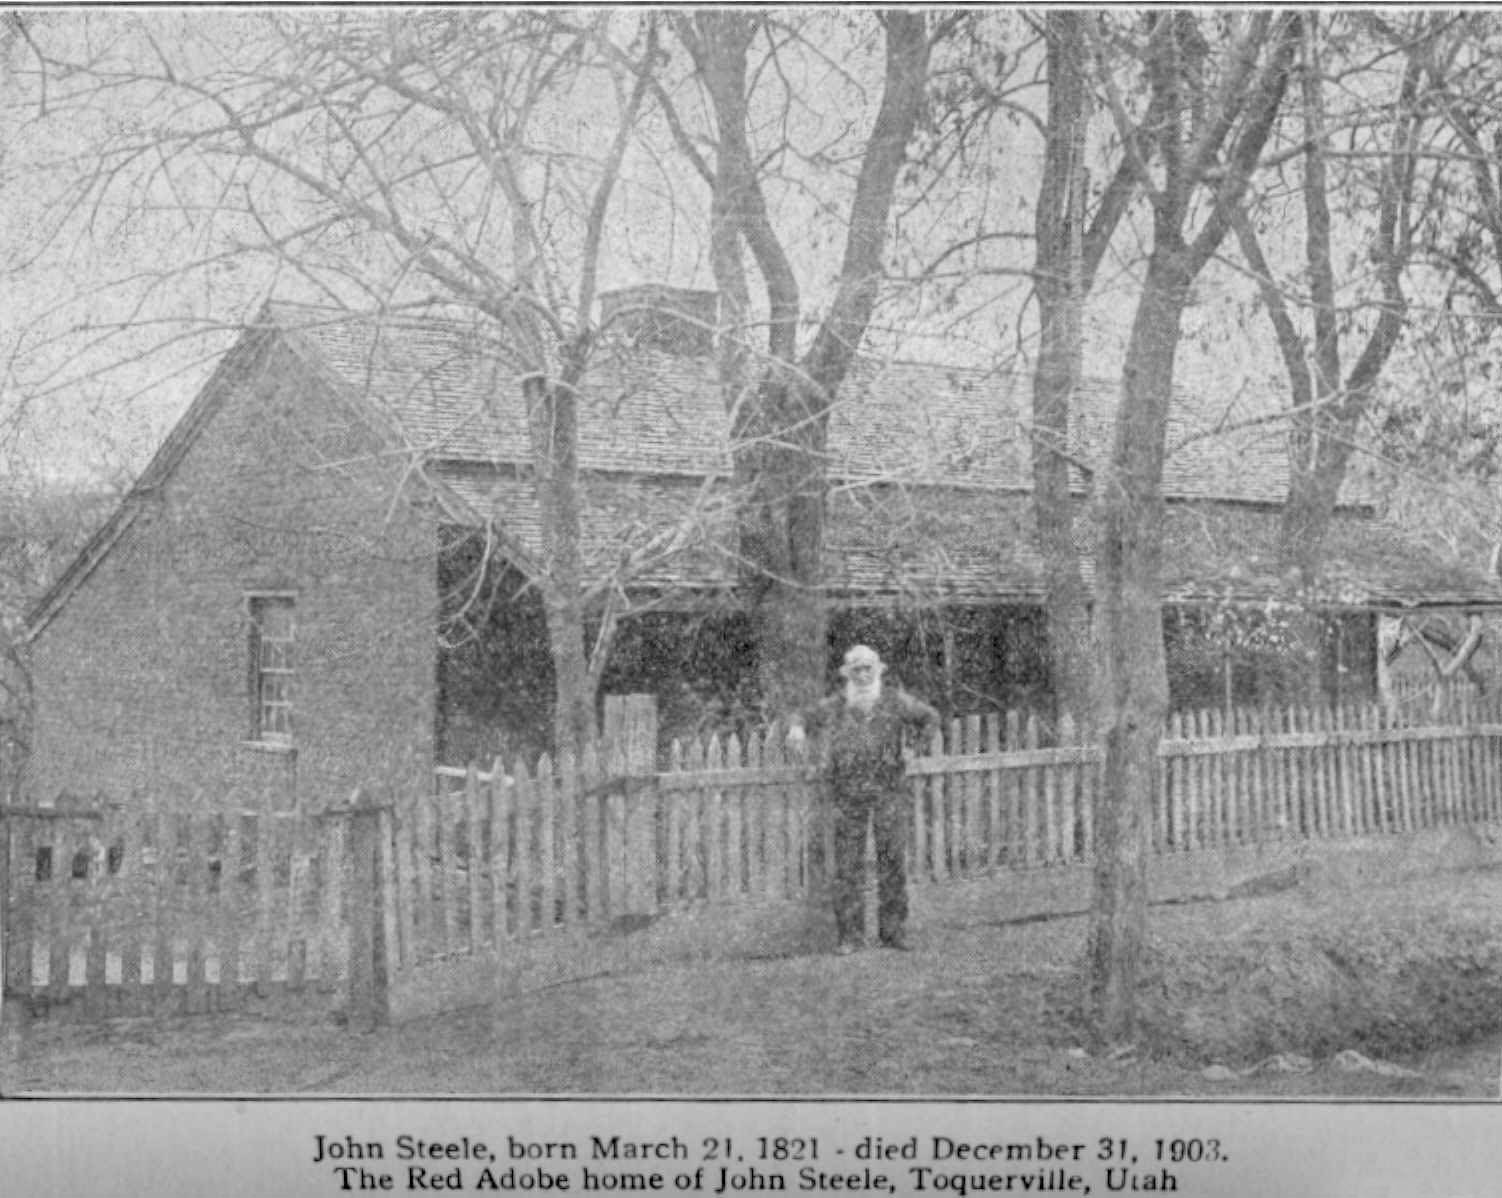 John Steele 1821-1903 in front of his Red Adobe home in Toquerville, Utah